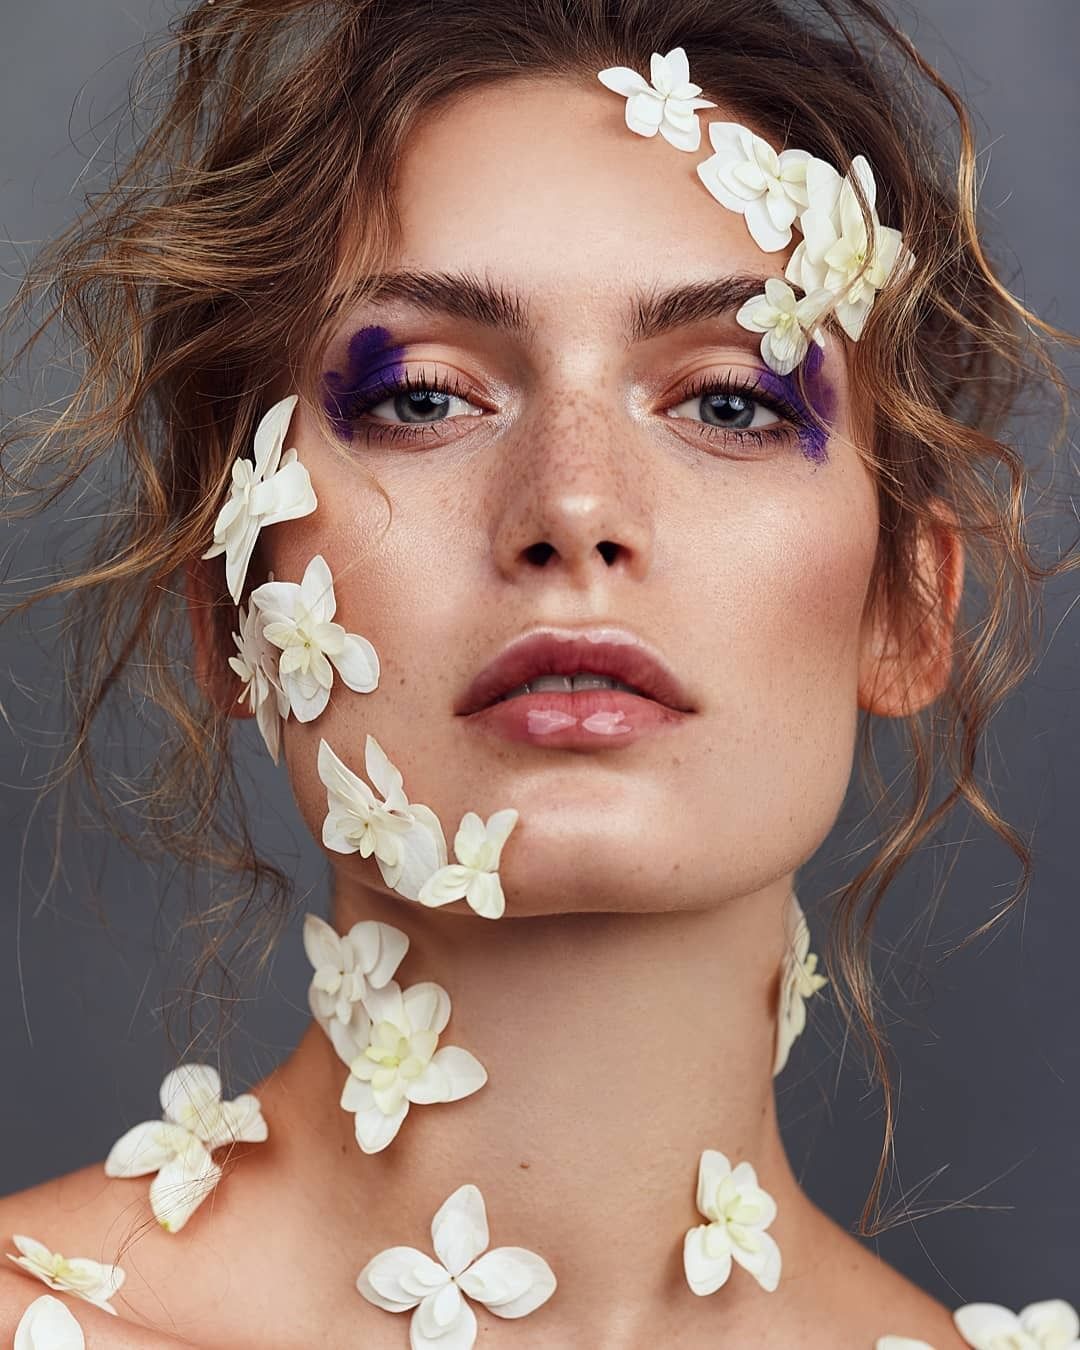 Our Favourite Models - Our Favourite Models -   12 beauty Photoshoot flowers ideas